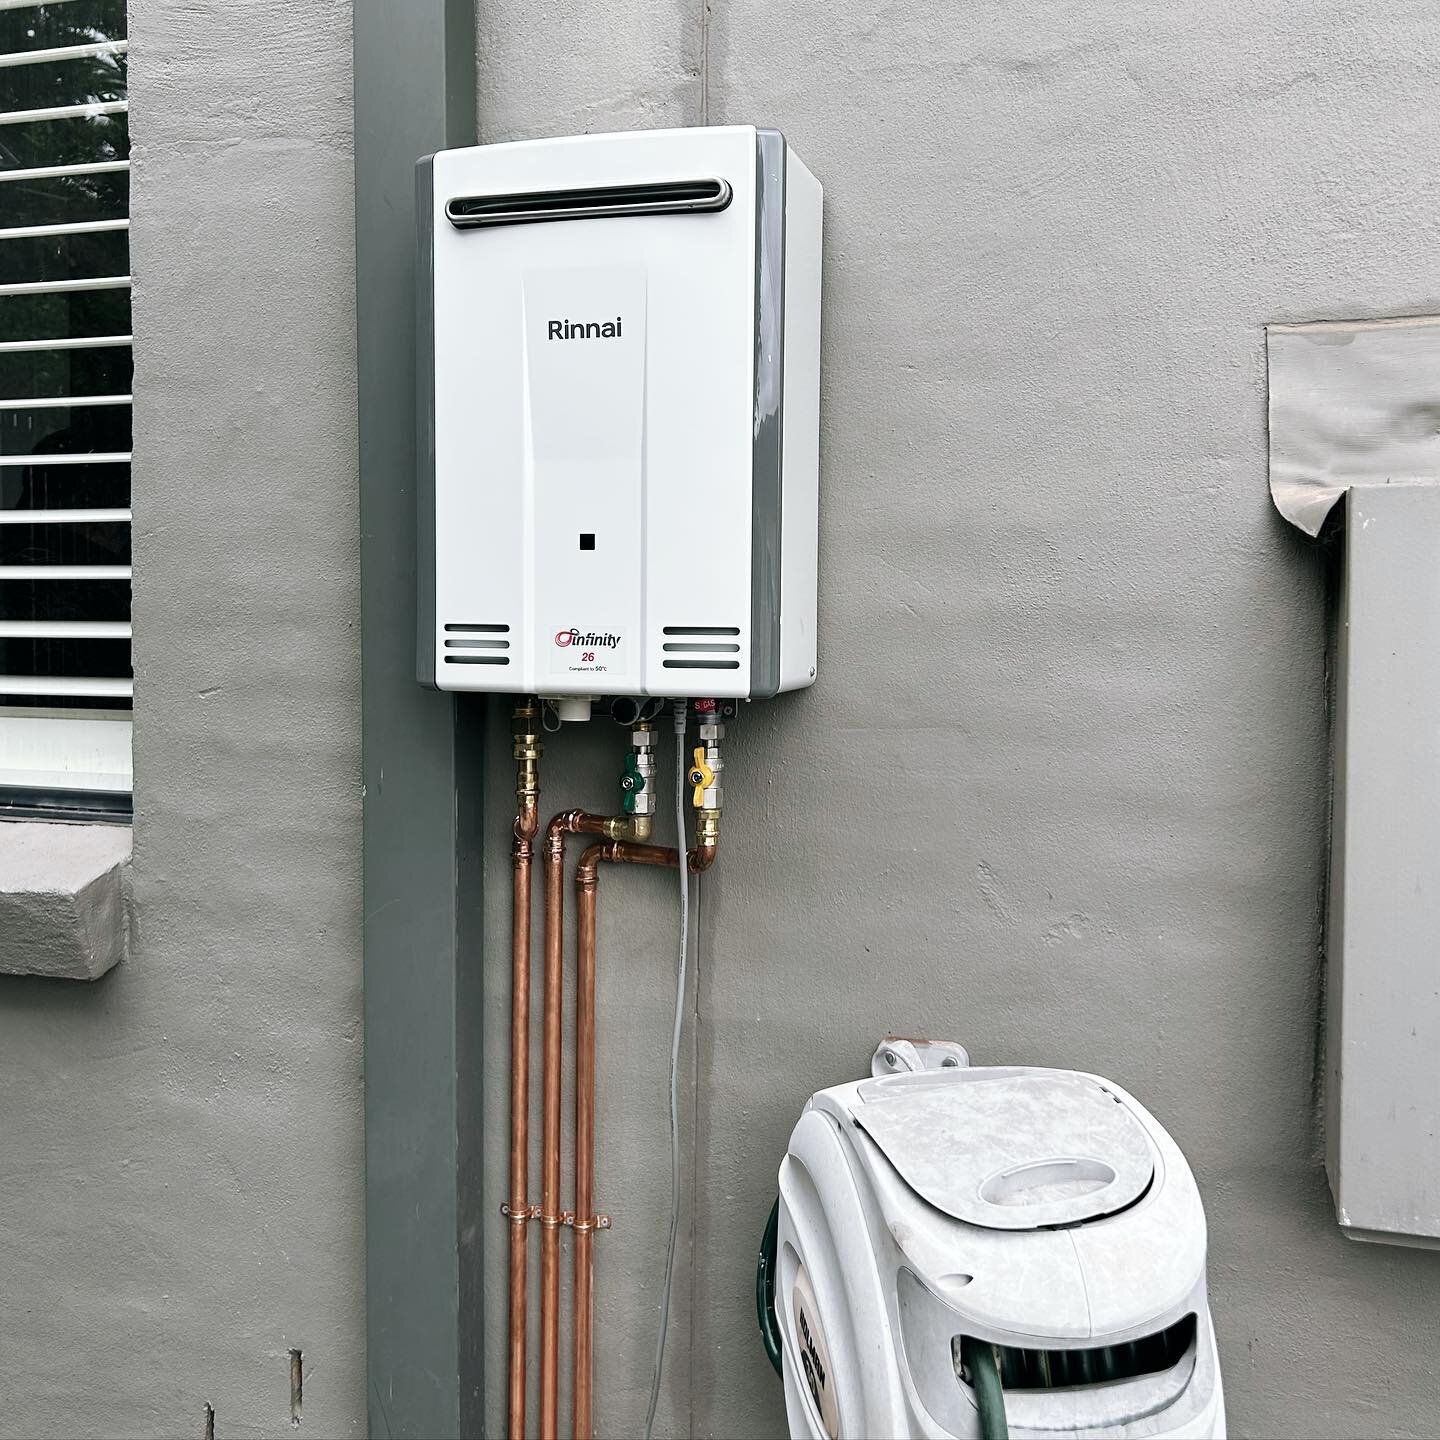 We love these @rinnai_au continuous flow heaters. 
This hot water system upgrade and relocation from an internal electric storage tank to an energy efficient, never ending supply of hot water, looks as good as it sounds 👌🏻👌🏻

SWIPE 👉🏻 to see be